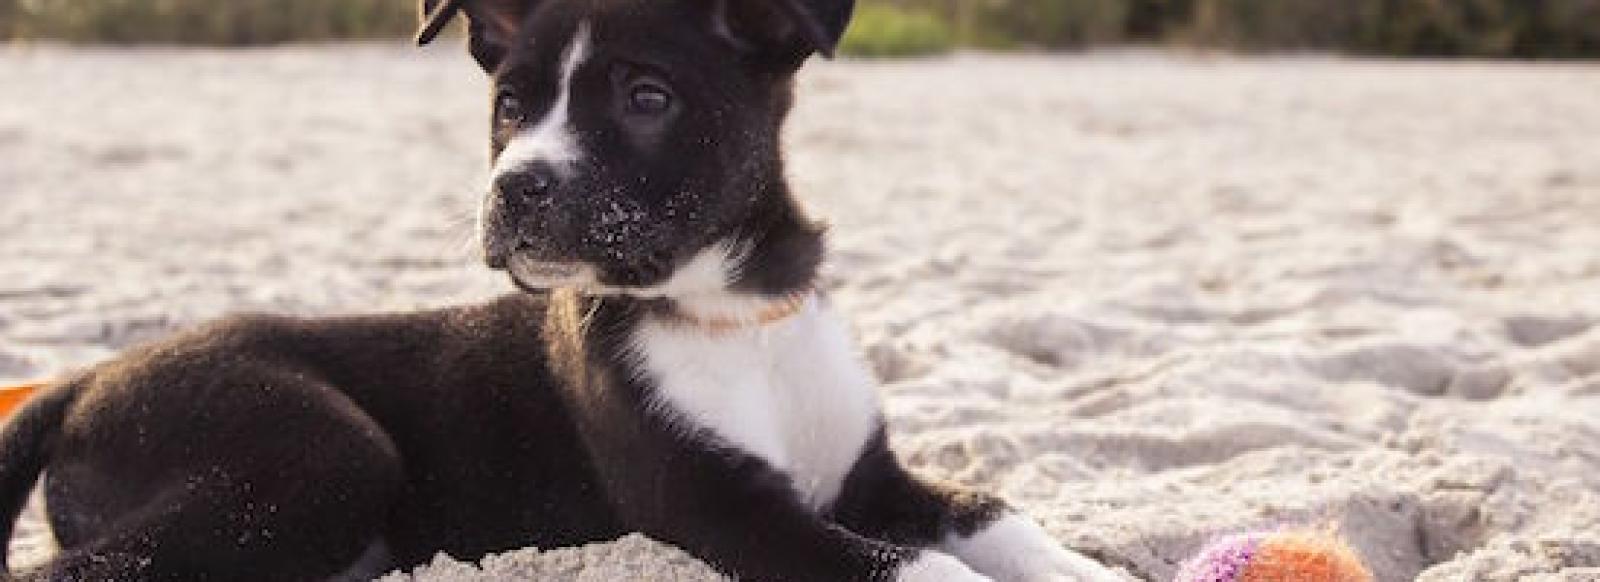 Puppy laying in sand on a beach